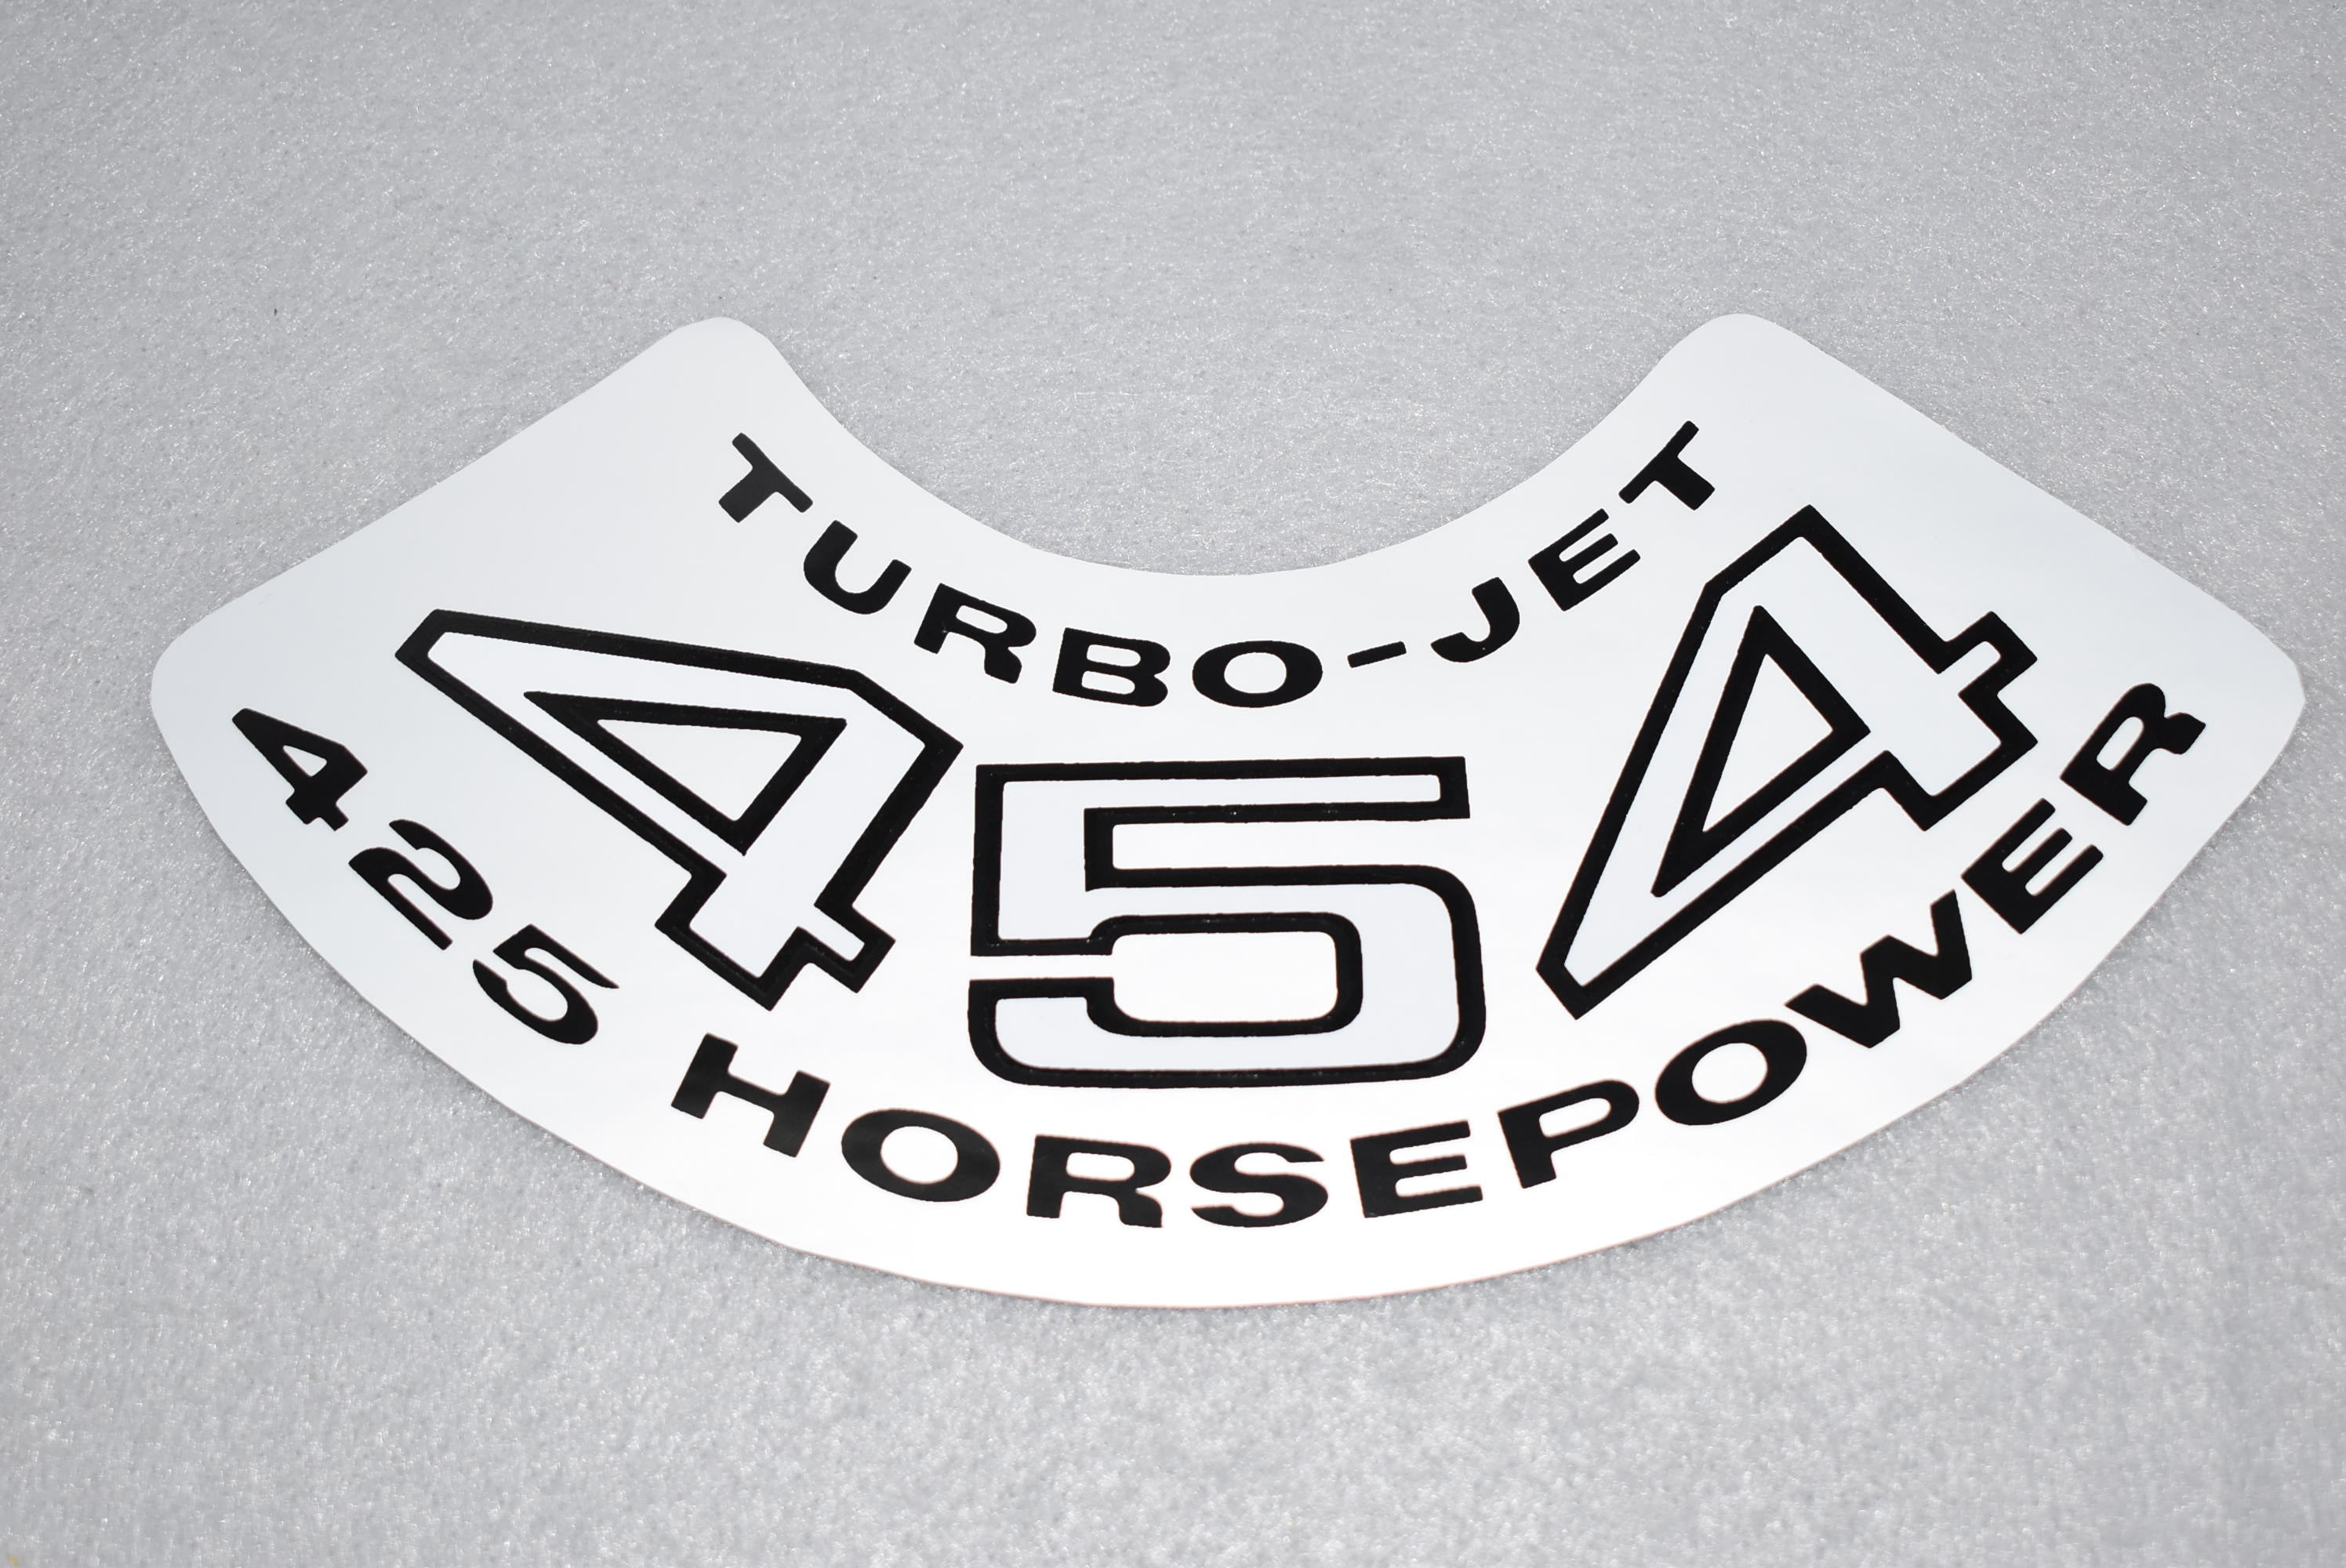 Corvette Turbo-Jet 454 / 425 HP Air Cleaner Decal / Product Number: D1